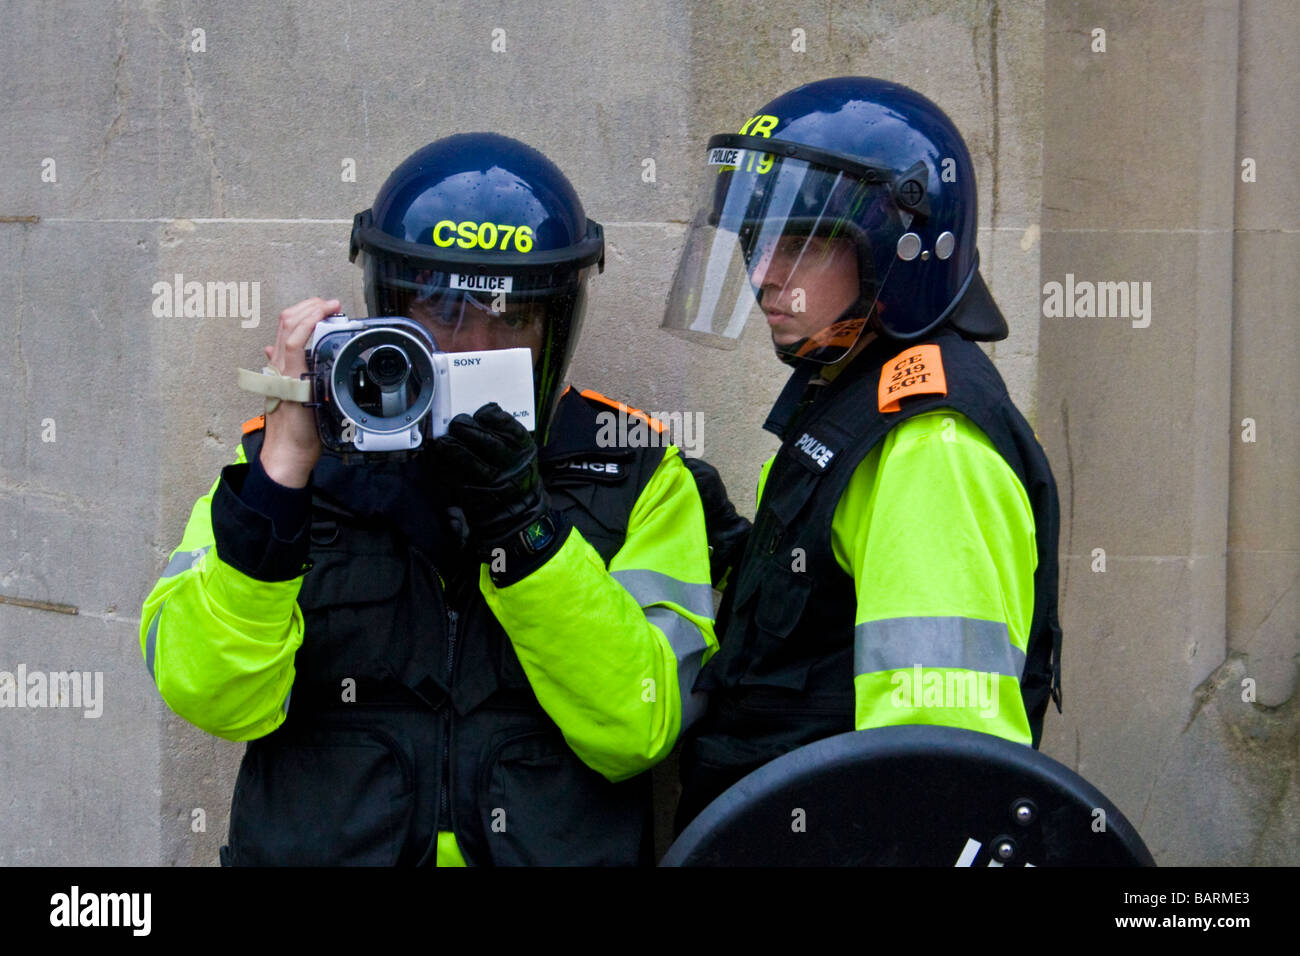 Riot police filming the crowd and events during may day protests in Brighton, Sussex, UK JPH0193 Stock Photo